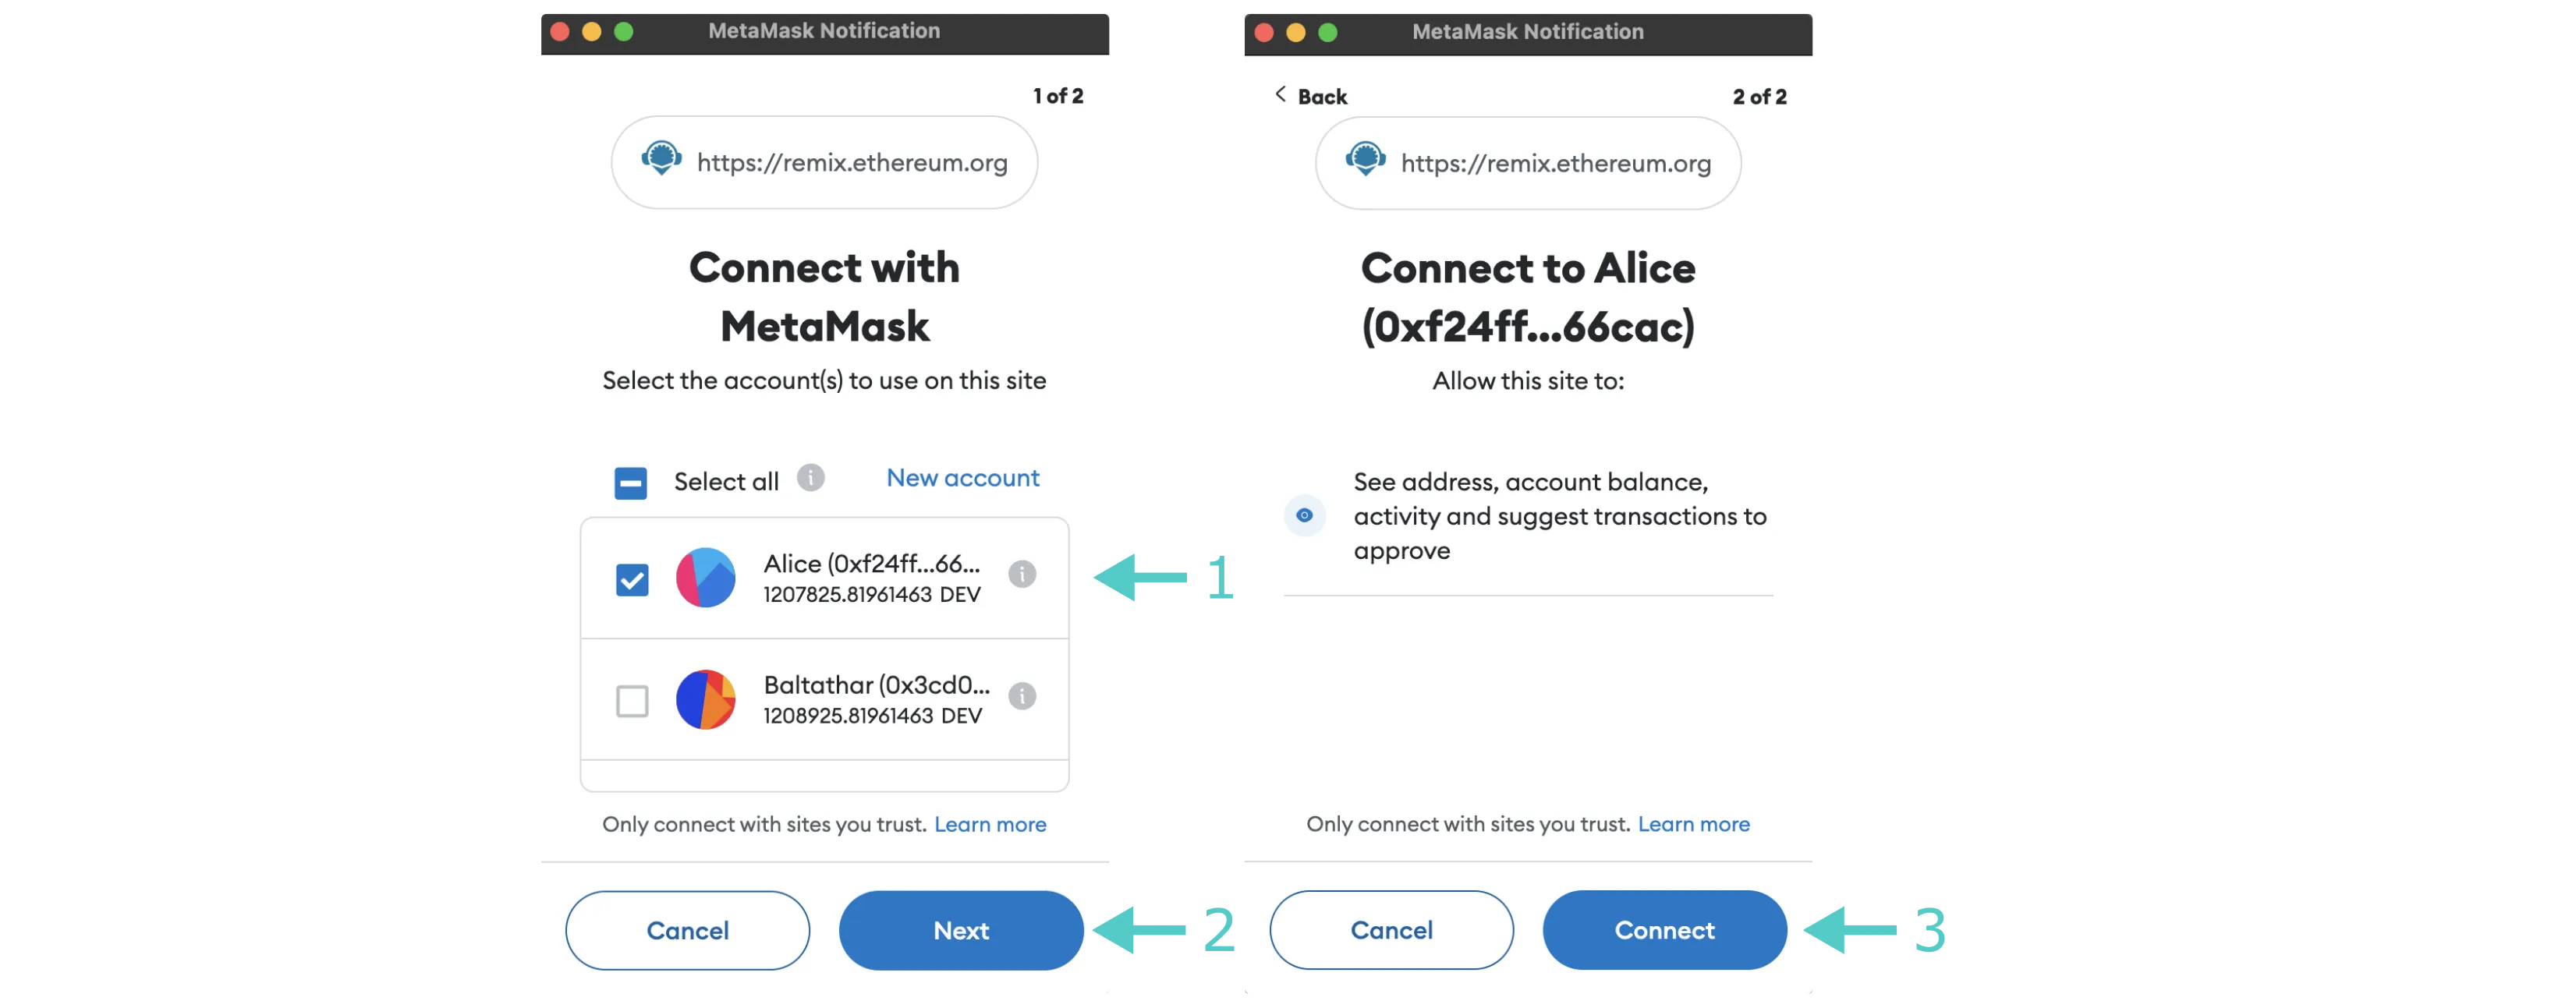 Two MetaMask screens that you must go through to connect to Remix: one that prompts you to choose an account to connect to and another that grants Remix permissions.